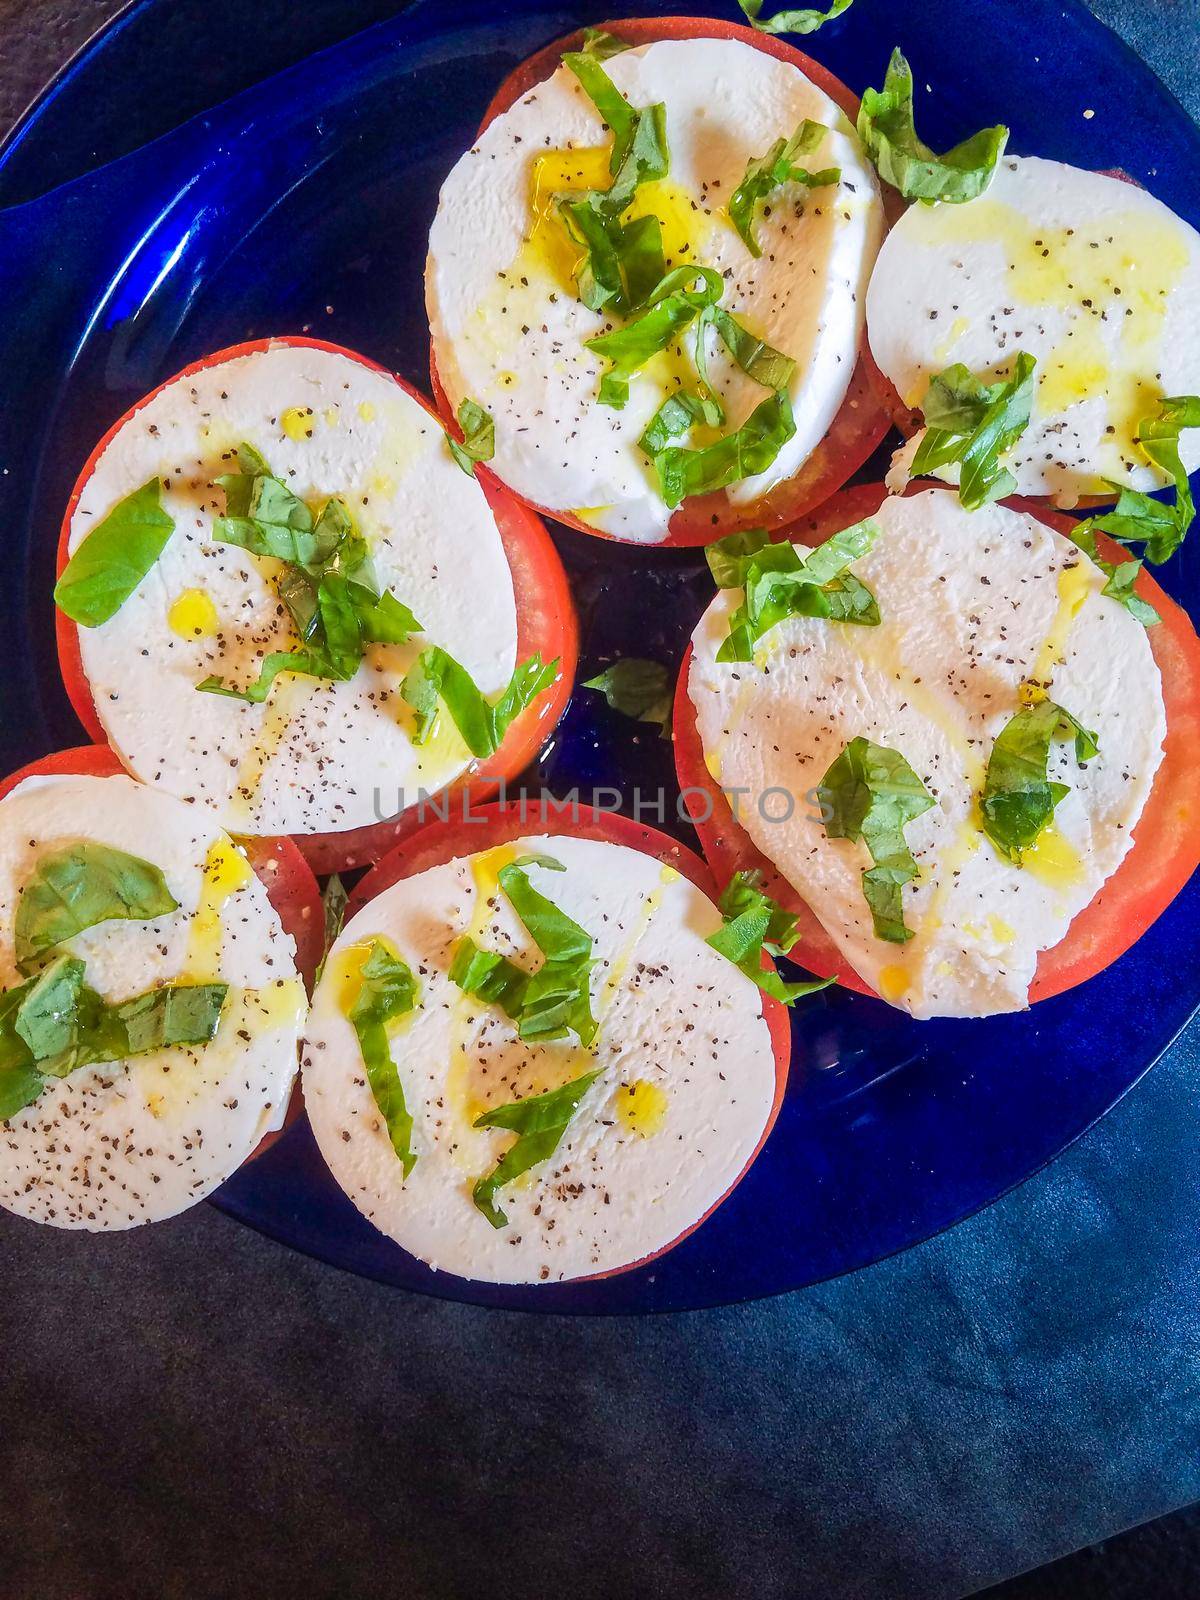 Keto style fresh Italian caprese salad. Mozzarella slices served on slices of beefsteak tomatoes, topped with fresh chopped basil, olive oil, salt and black pepper.